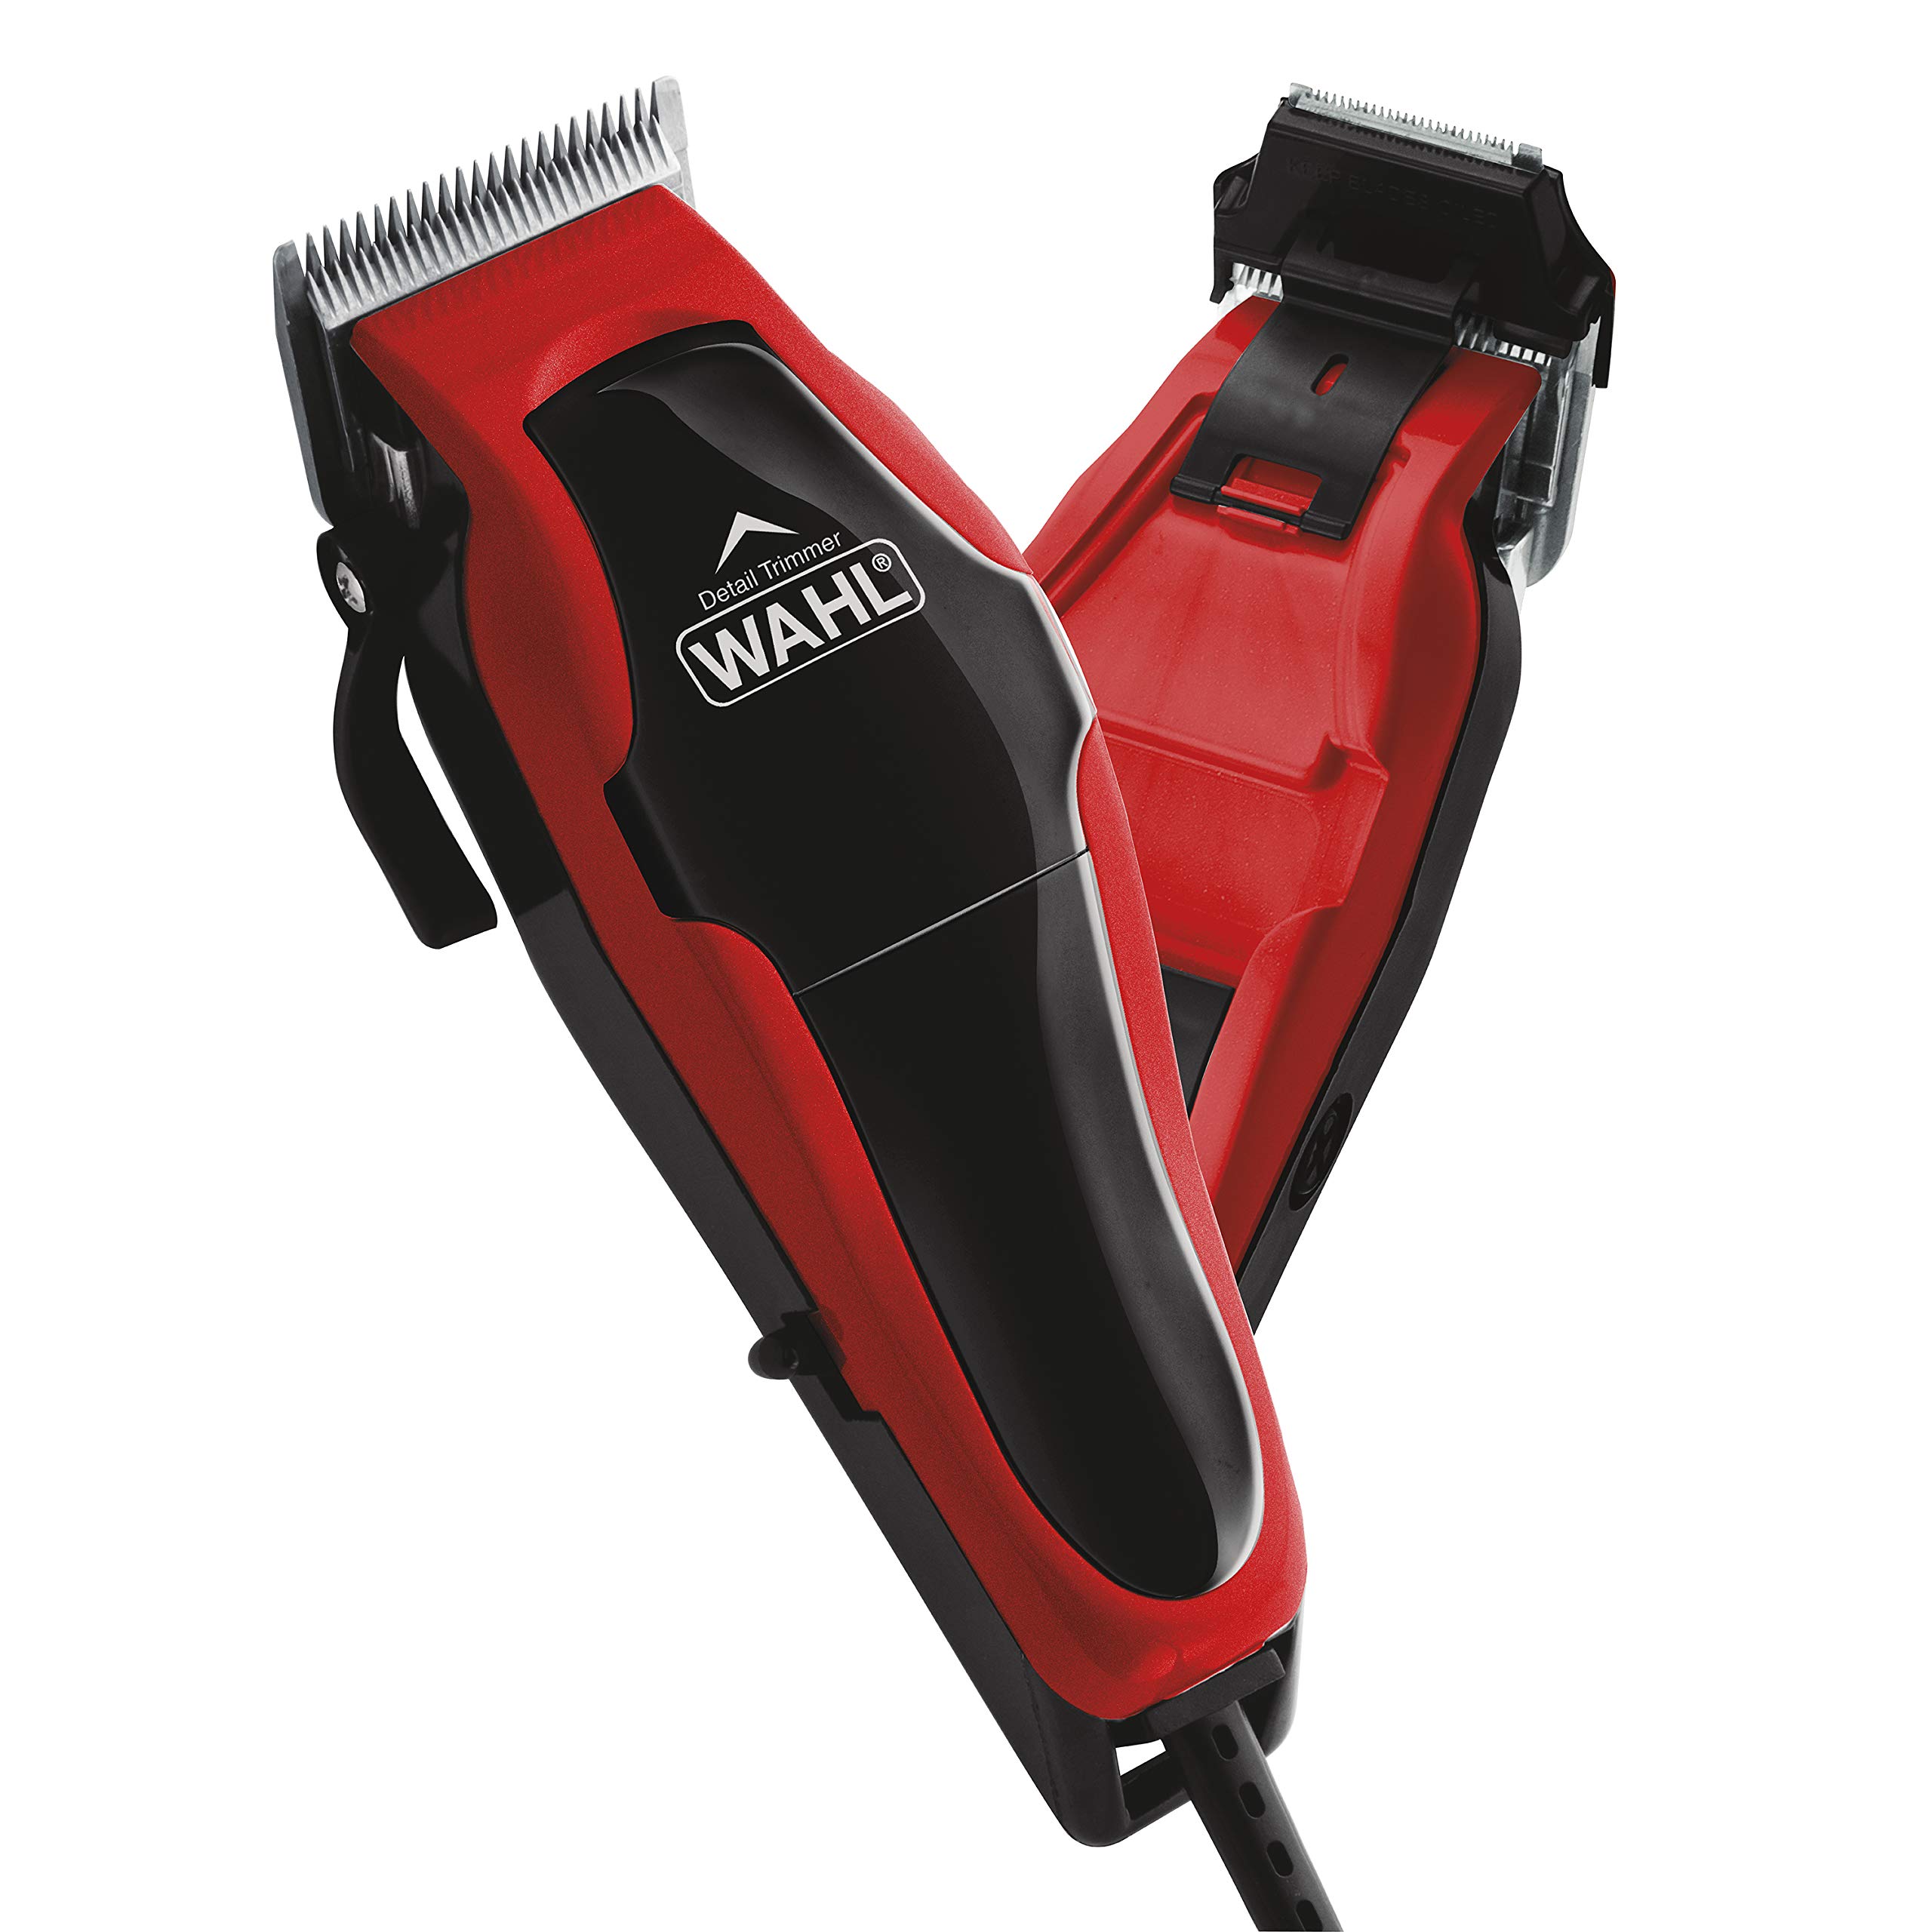 Wahl USA Clip ‘N Trim 2 In 1 Corded Hair Clipper with Pop Up Trimmer Kit, Perfect for Home Haircuts and Touching Up Around Necklines and Sideburns – Model 79900-1501P